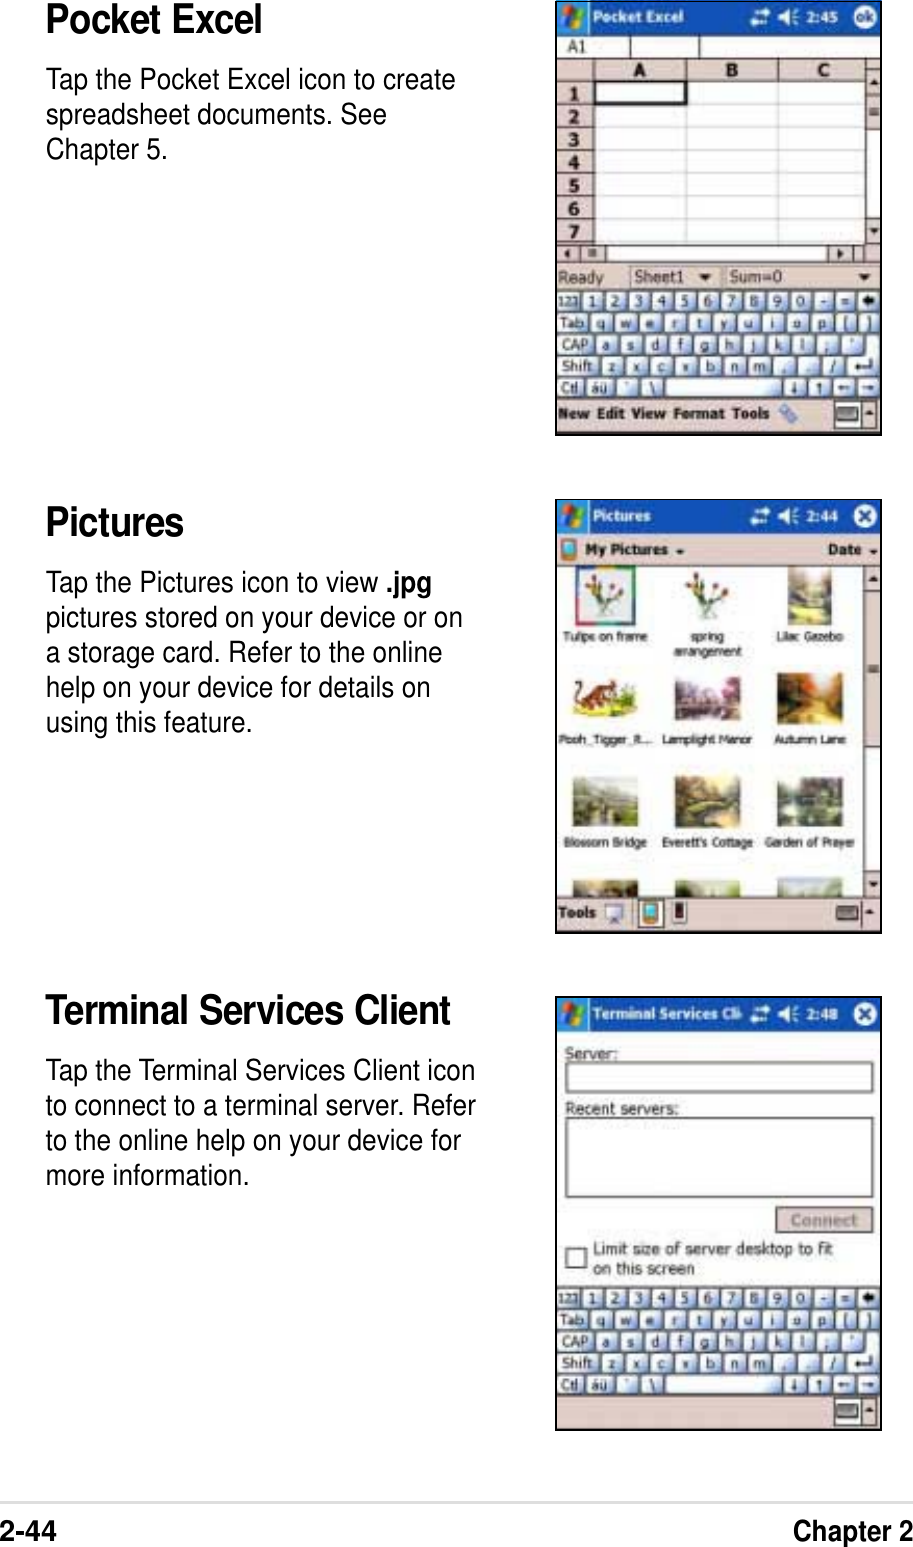 2-44Chapter 2Pocket ExcelTap the Pocket Excel icon to createspreadsheet documents. SeeChapter 5.PicturesTap the Pictures icon to view .jpgpictures stored on your device or ona storage card. Refer to the onlinehelp on your device for details onusing this feature.Terminal Services ClientTap the Terminal Services Client iconto connect to a terminal server. Referto the online help on your device formore information.